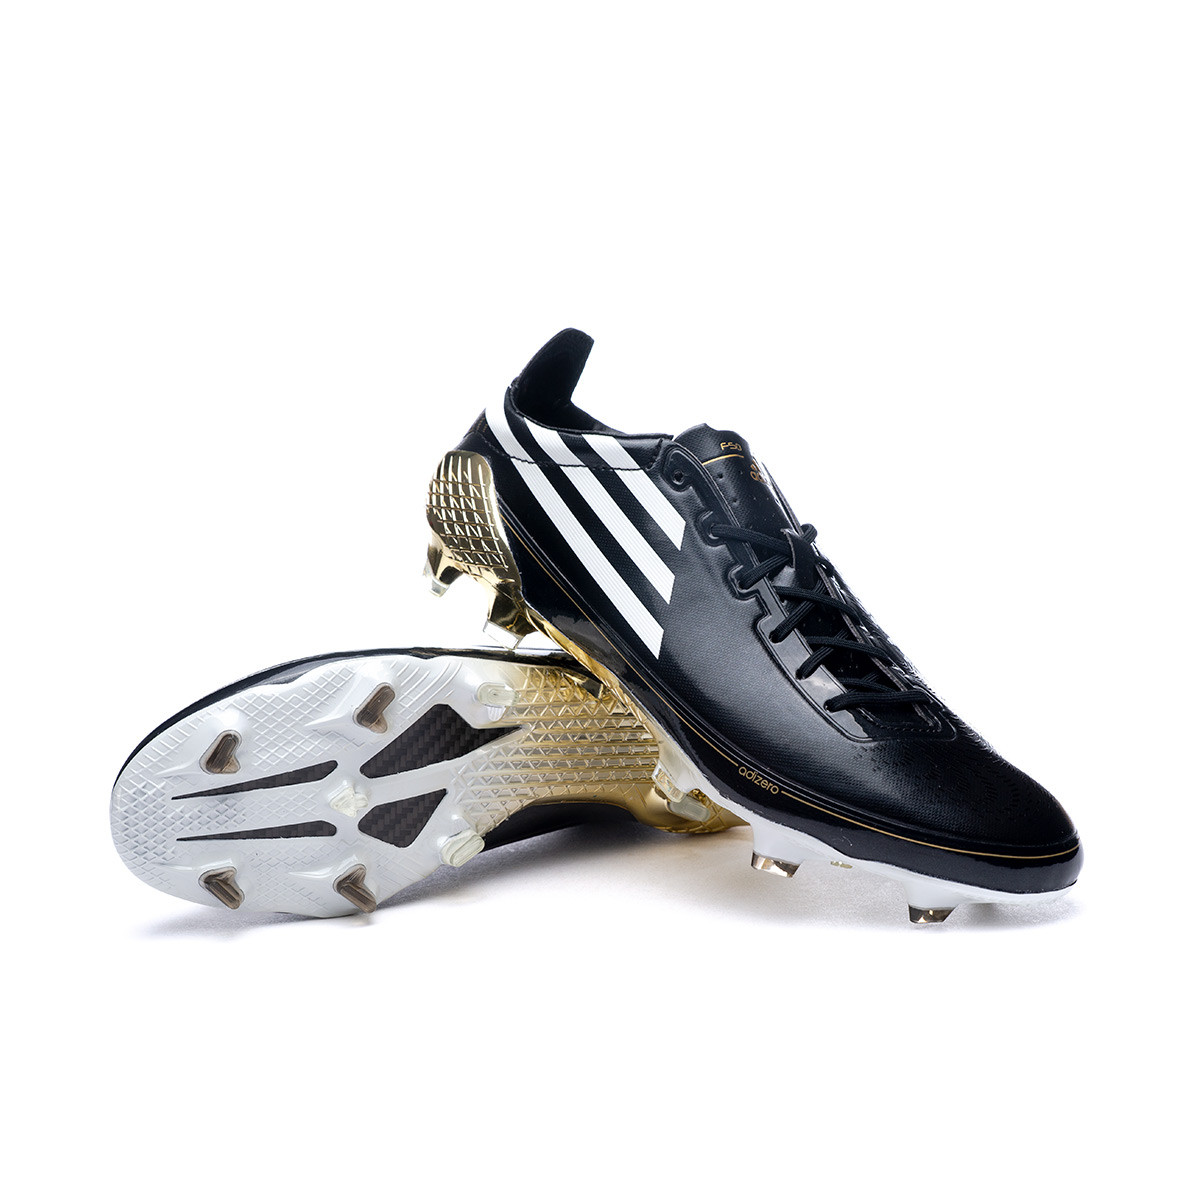 Theoretical Dependence cell Football Boots adidas F50 Ghosted Adizero Black-White-Gold - Fútbol Emotion